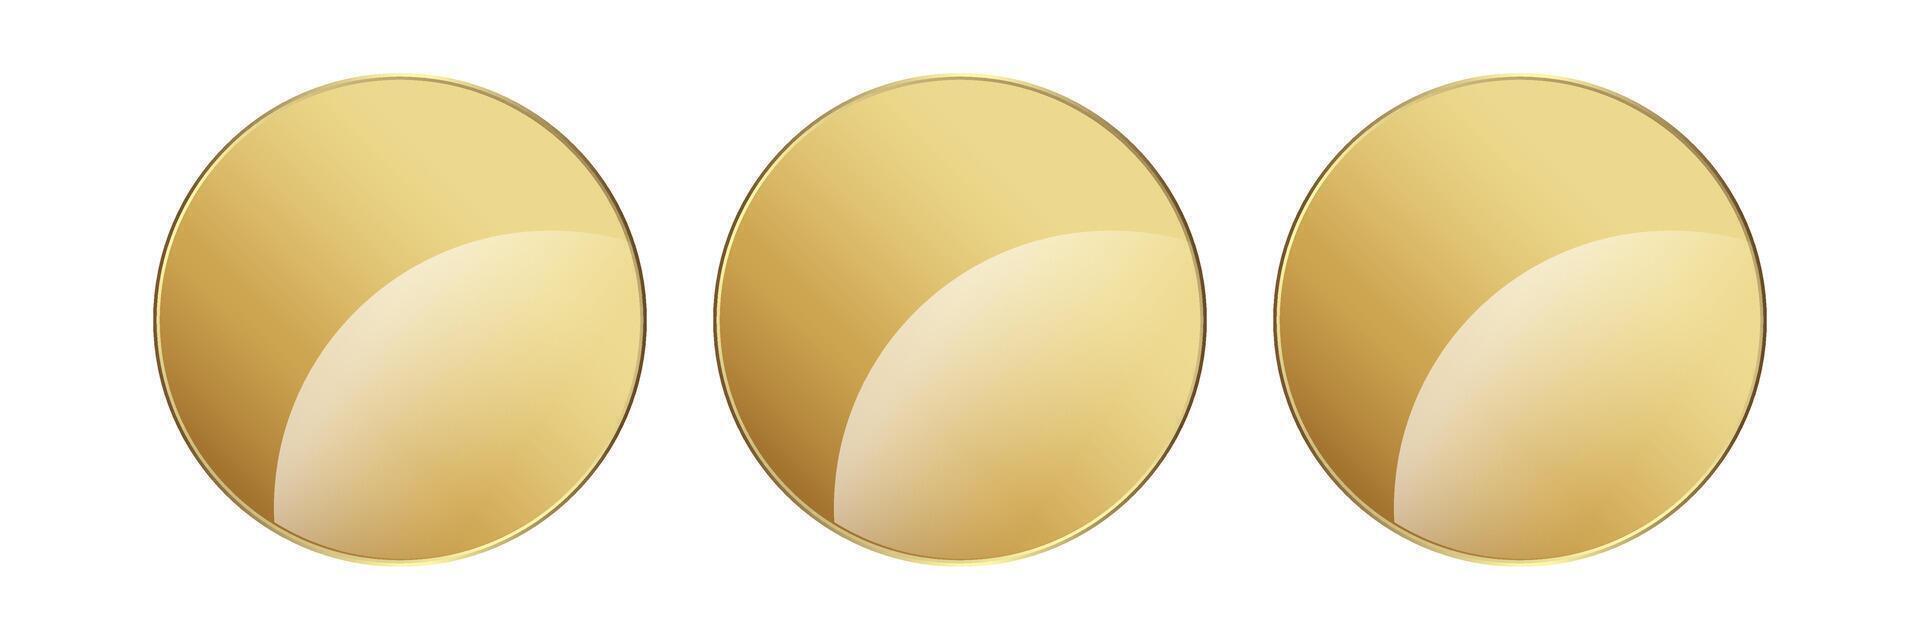 Three Gold circle button on isolated white background and 3 luxury gold icon, element, symbol on isolated white. Vector illustration